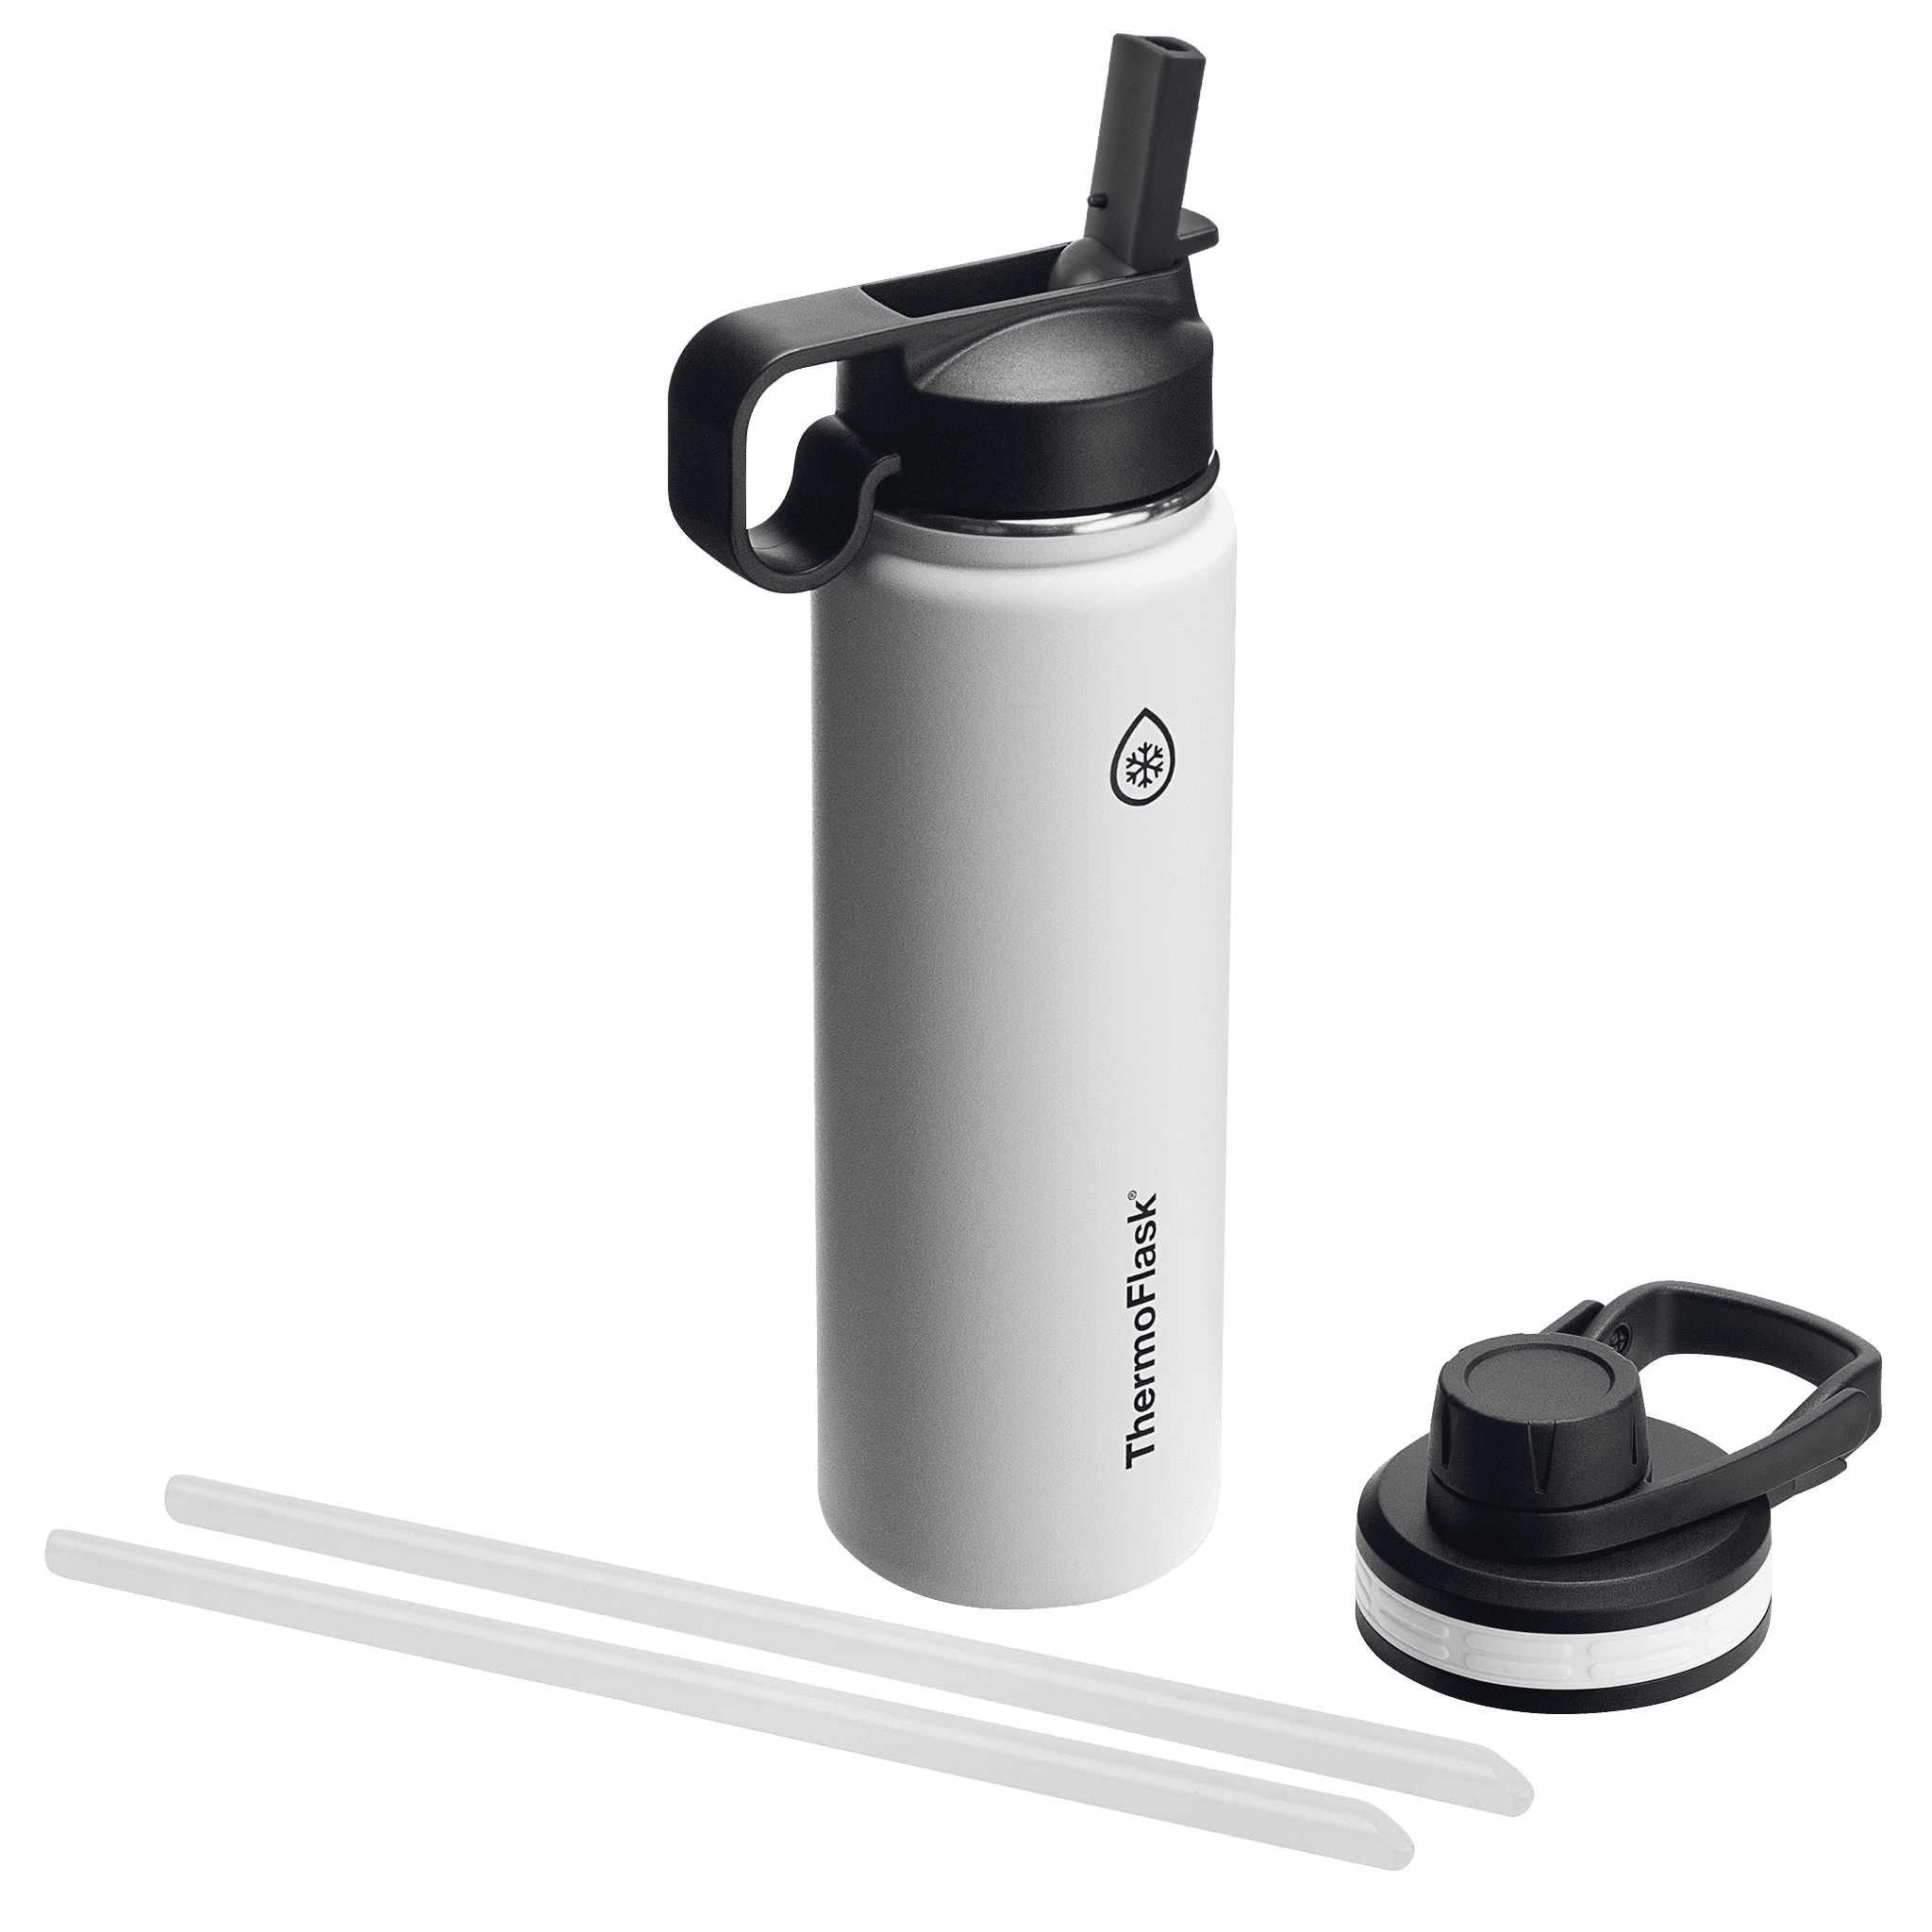 Thermoflask Double Stainless Steel Insulated Water Bottle Capri 32 oz 